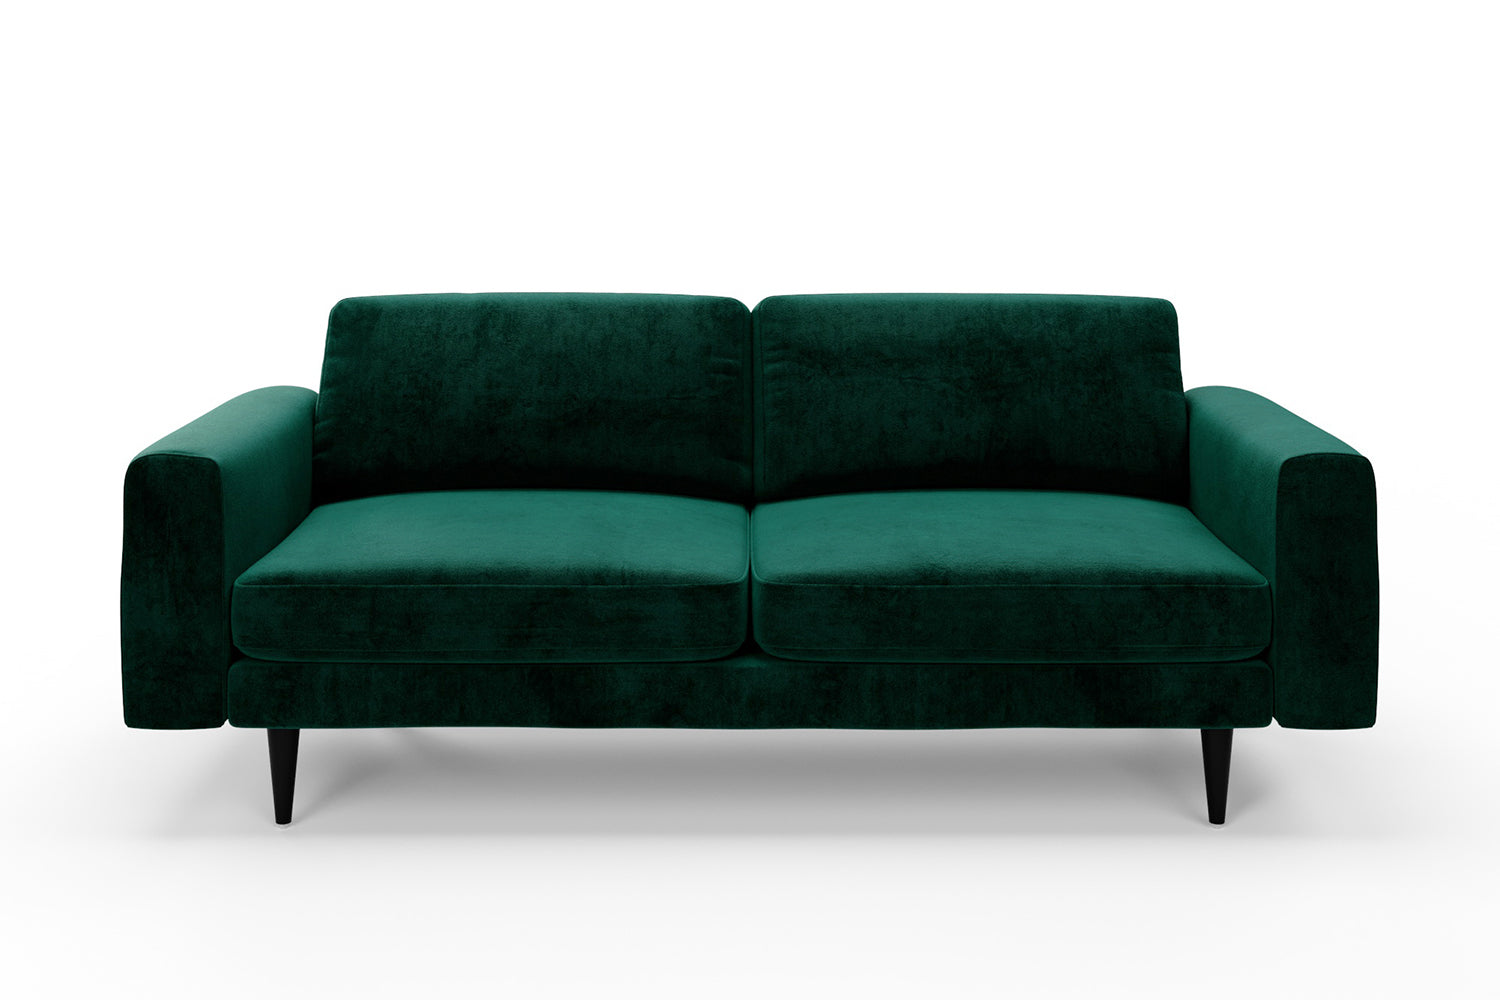 SNUG | The Big Chill 3 Seater Sofa in Forest Green variant_40414878466096